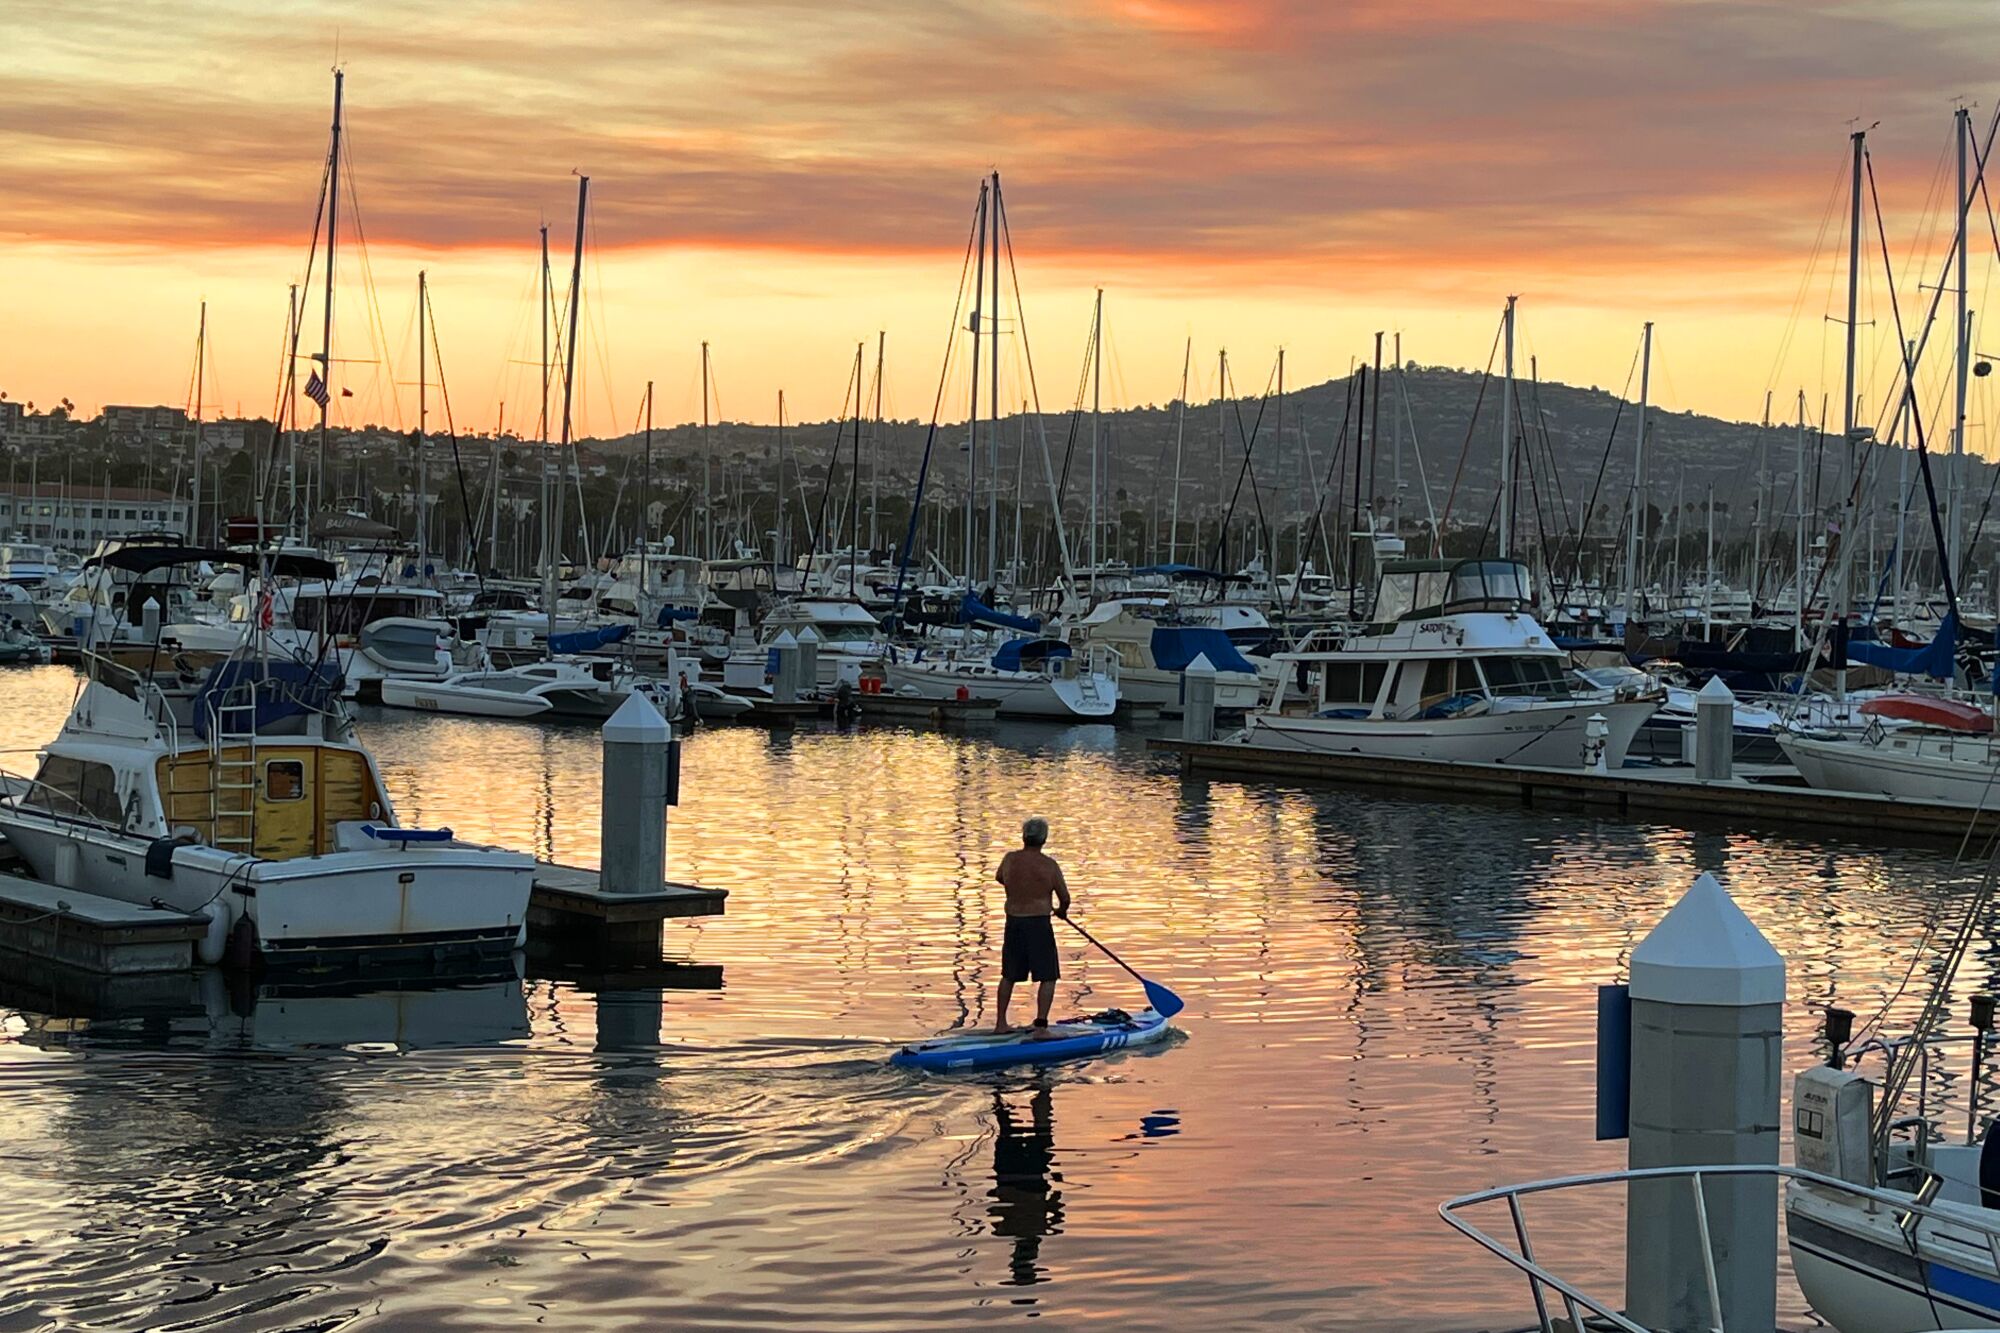 A padddle baorder in the San Pedro marina under a smoky sunset, due to the wildfires in Southern California